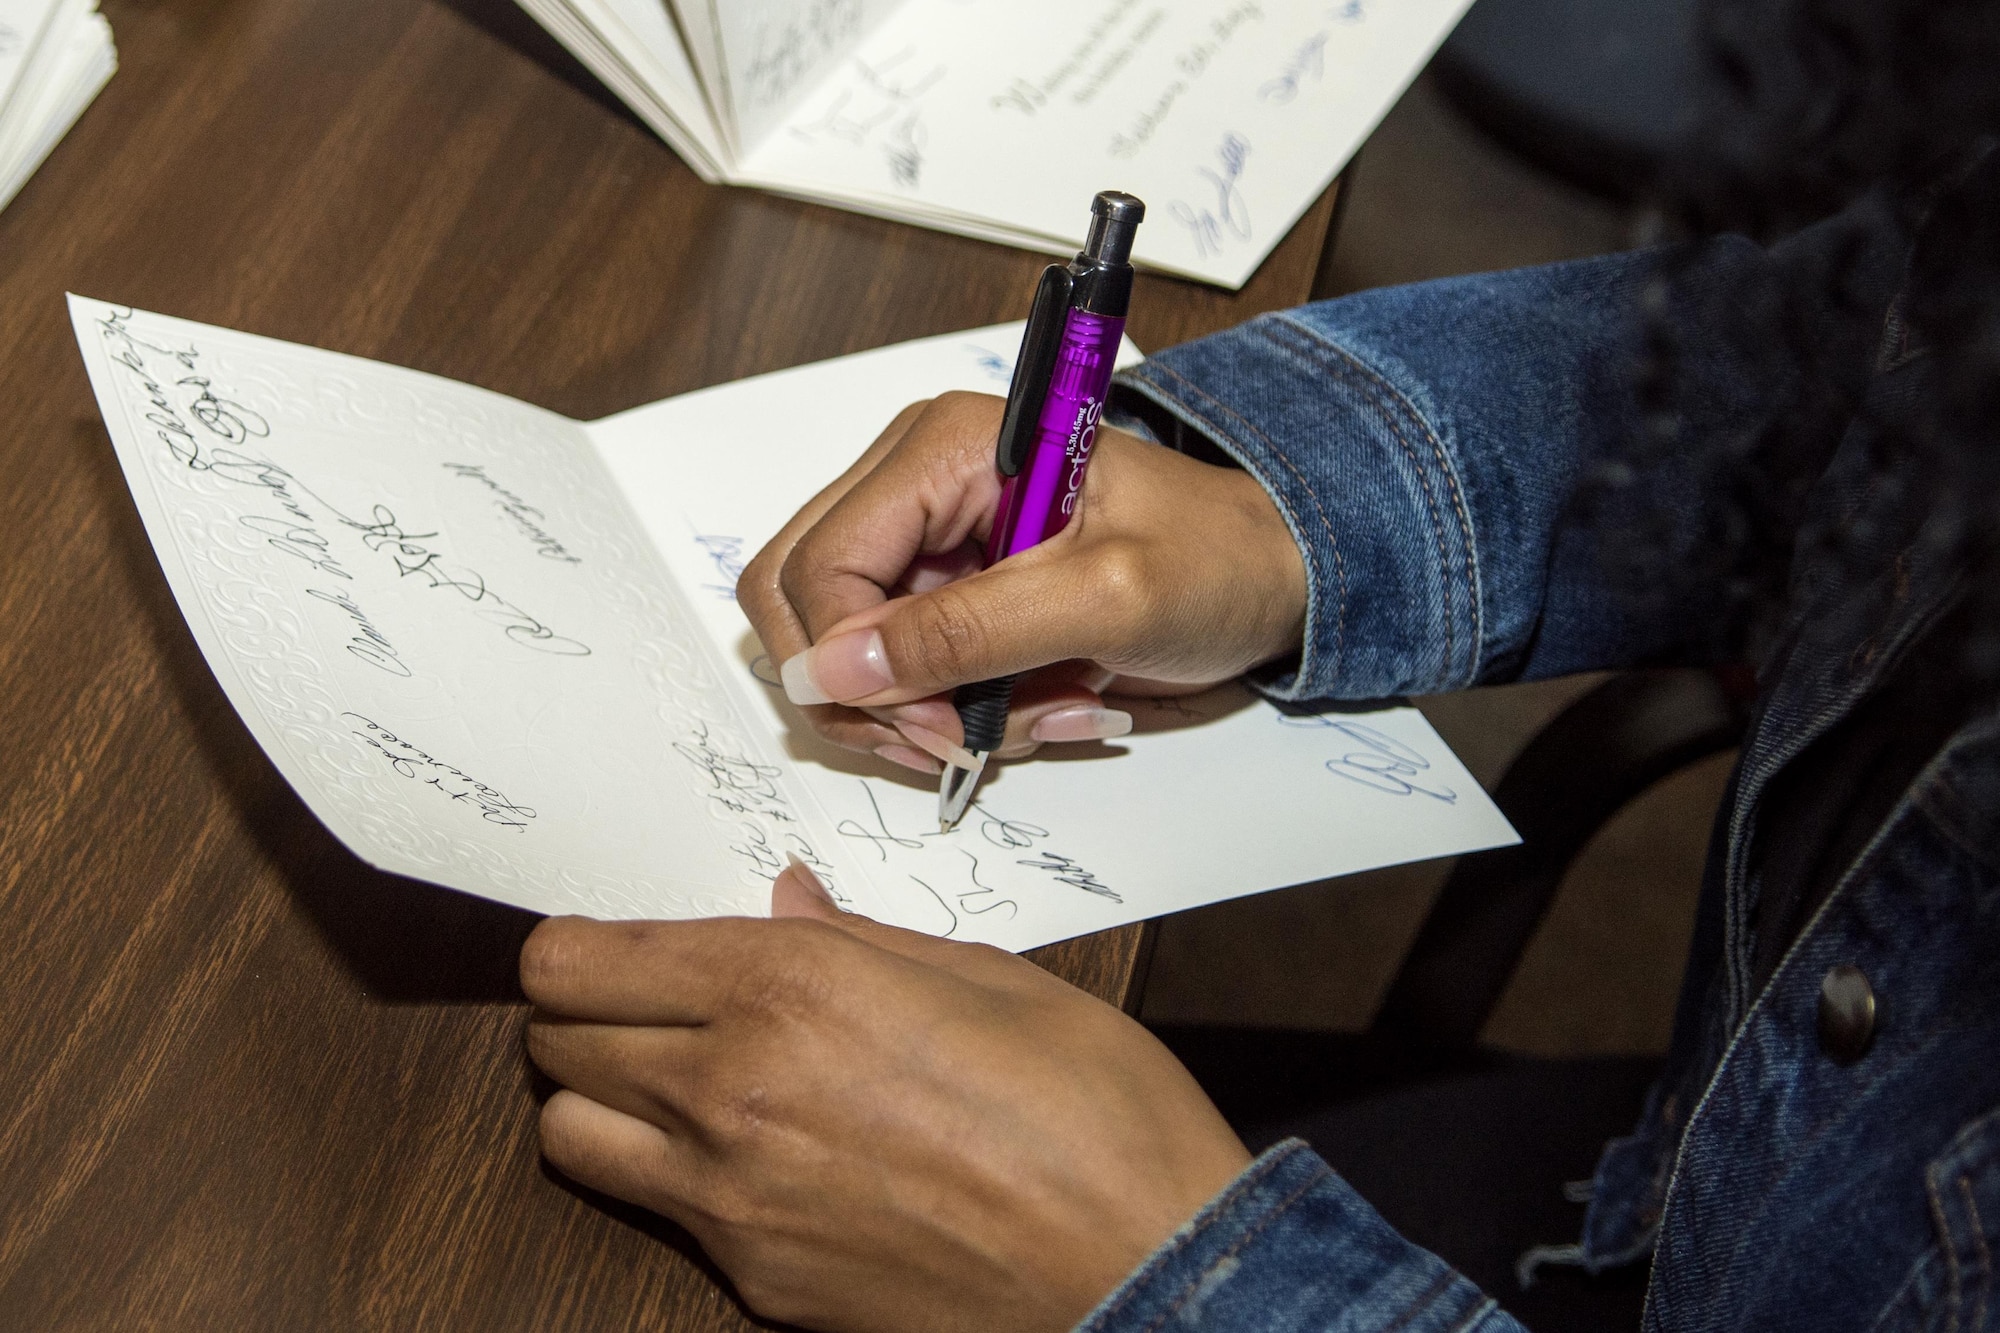 Airman Miranda Loera, 4th Fighter Wing Public Affairs photojournalist, signs holiday cards in Goldsboro, North Carolina, before departing to visit with residents of the North Carolina State Veterans Home in Kinston, North Carolina, Dec. 24, 2016. About 45 volunteers from Seymour Johnson Air Force Base, Goldsboro Elk Lodge #139 and Wayne County passed out handmade goody bags and Christmas cards to the veterans during the holiday visit. (U.S. Air Force photo by Airman Shawna L. Keyes)